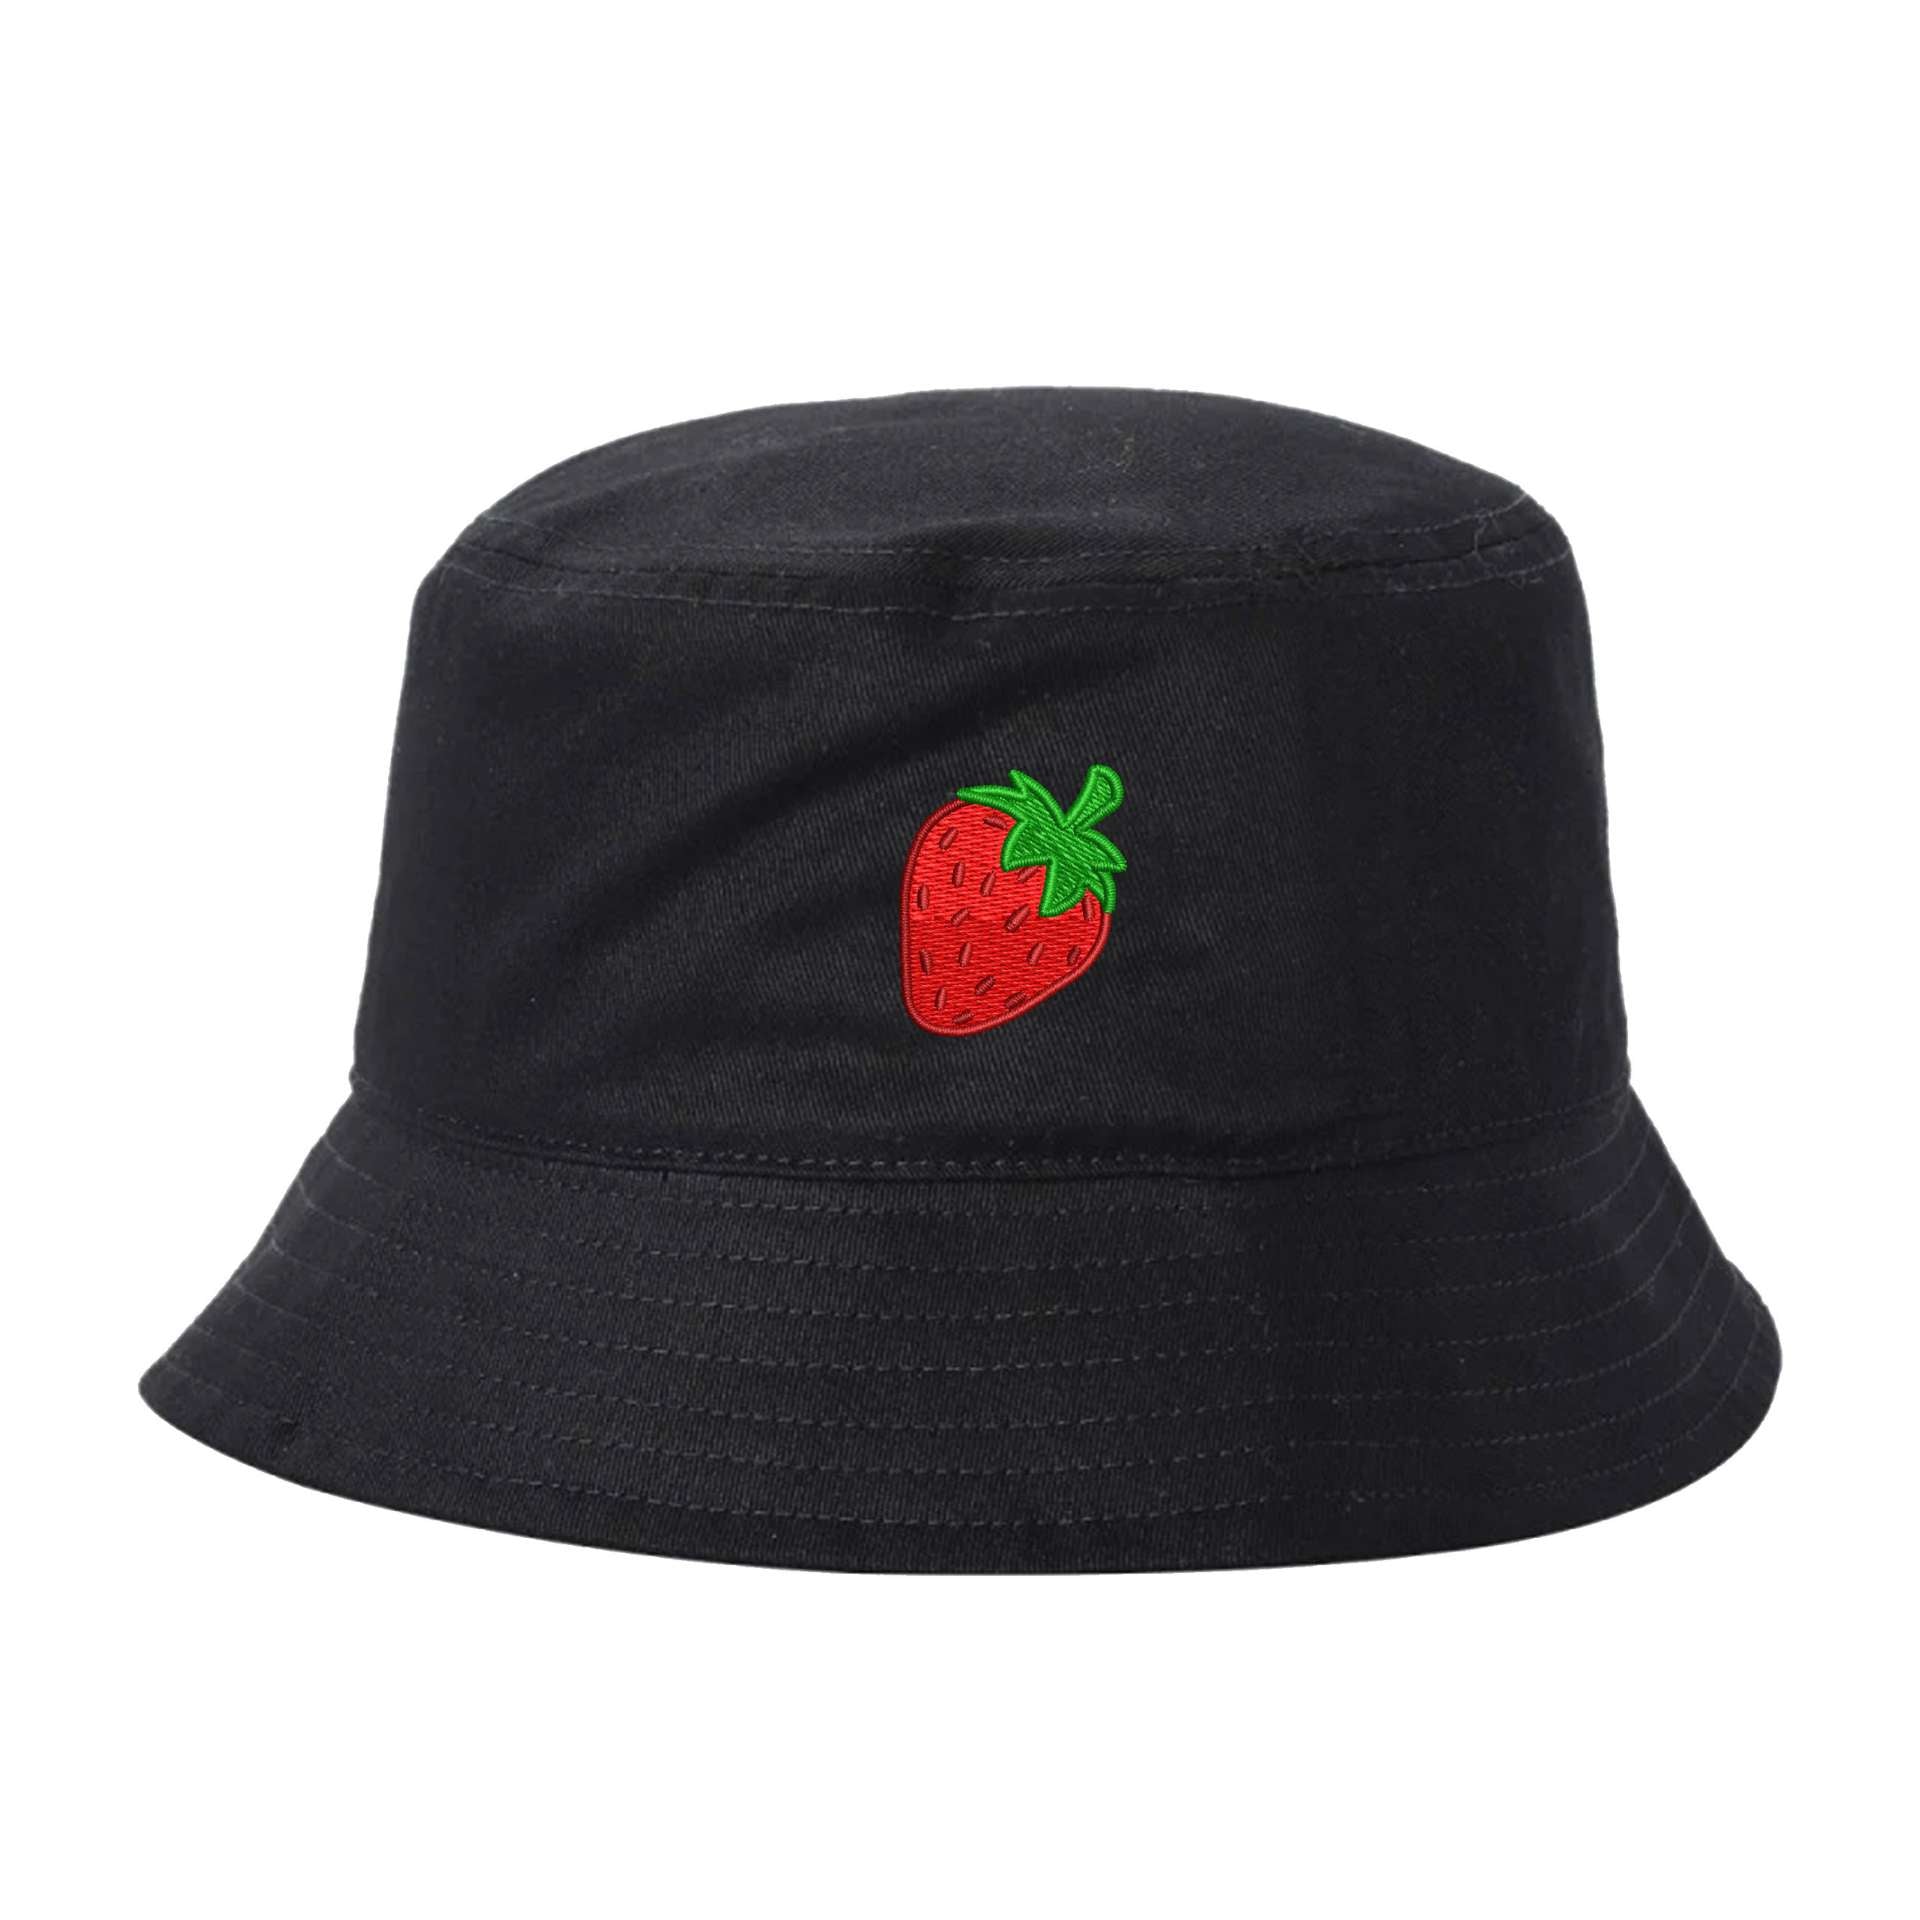 Black Bucket Hat embroidered with a strawberry - DSY Lifestyle